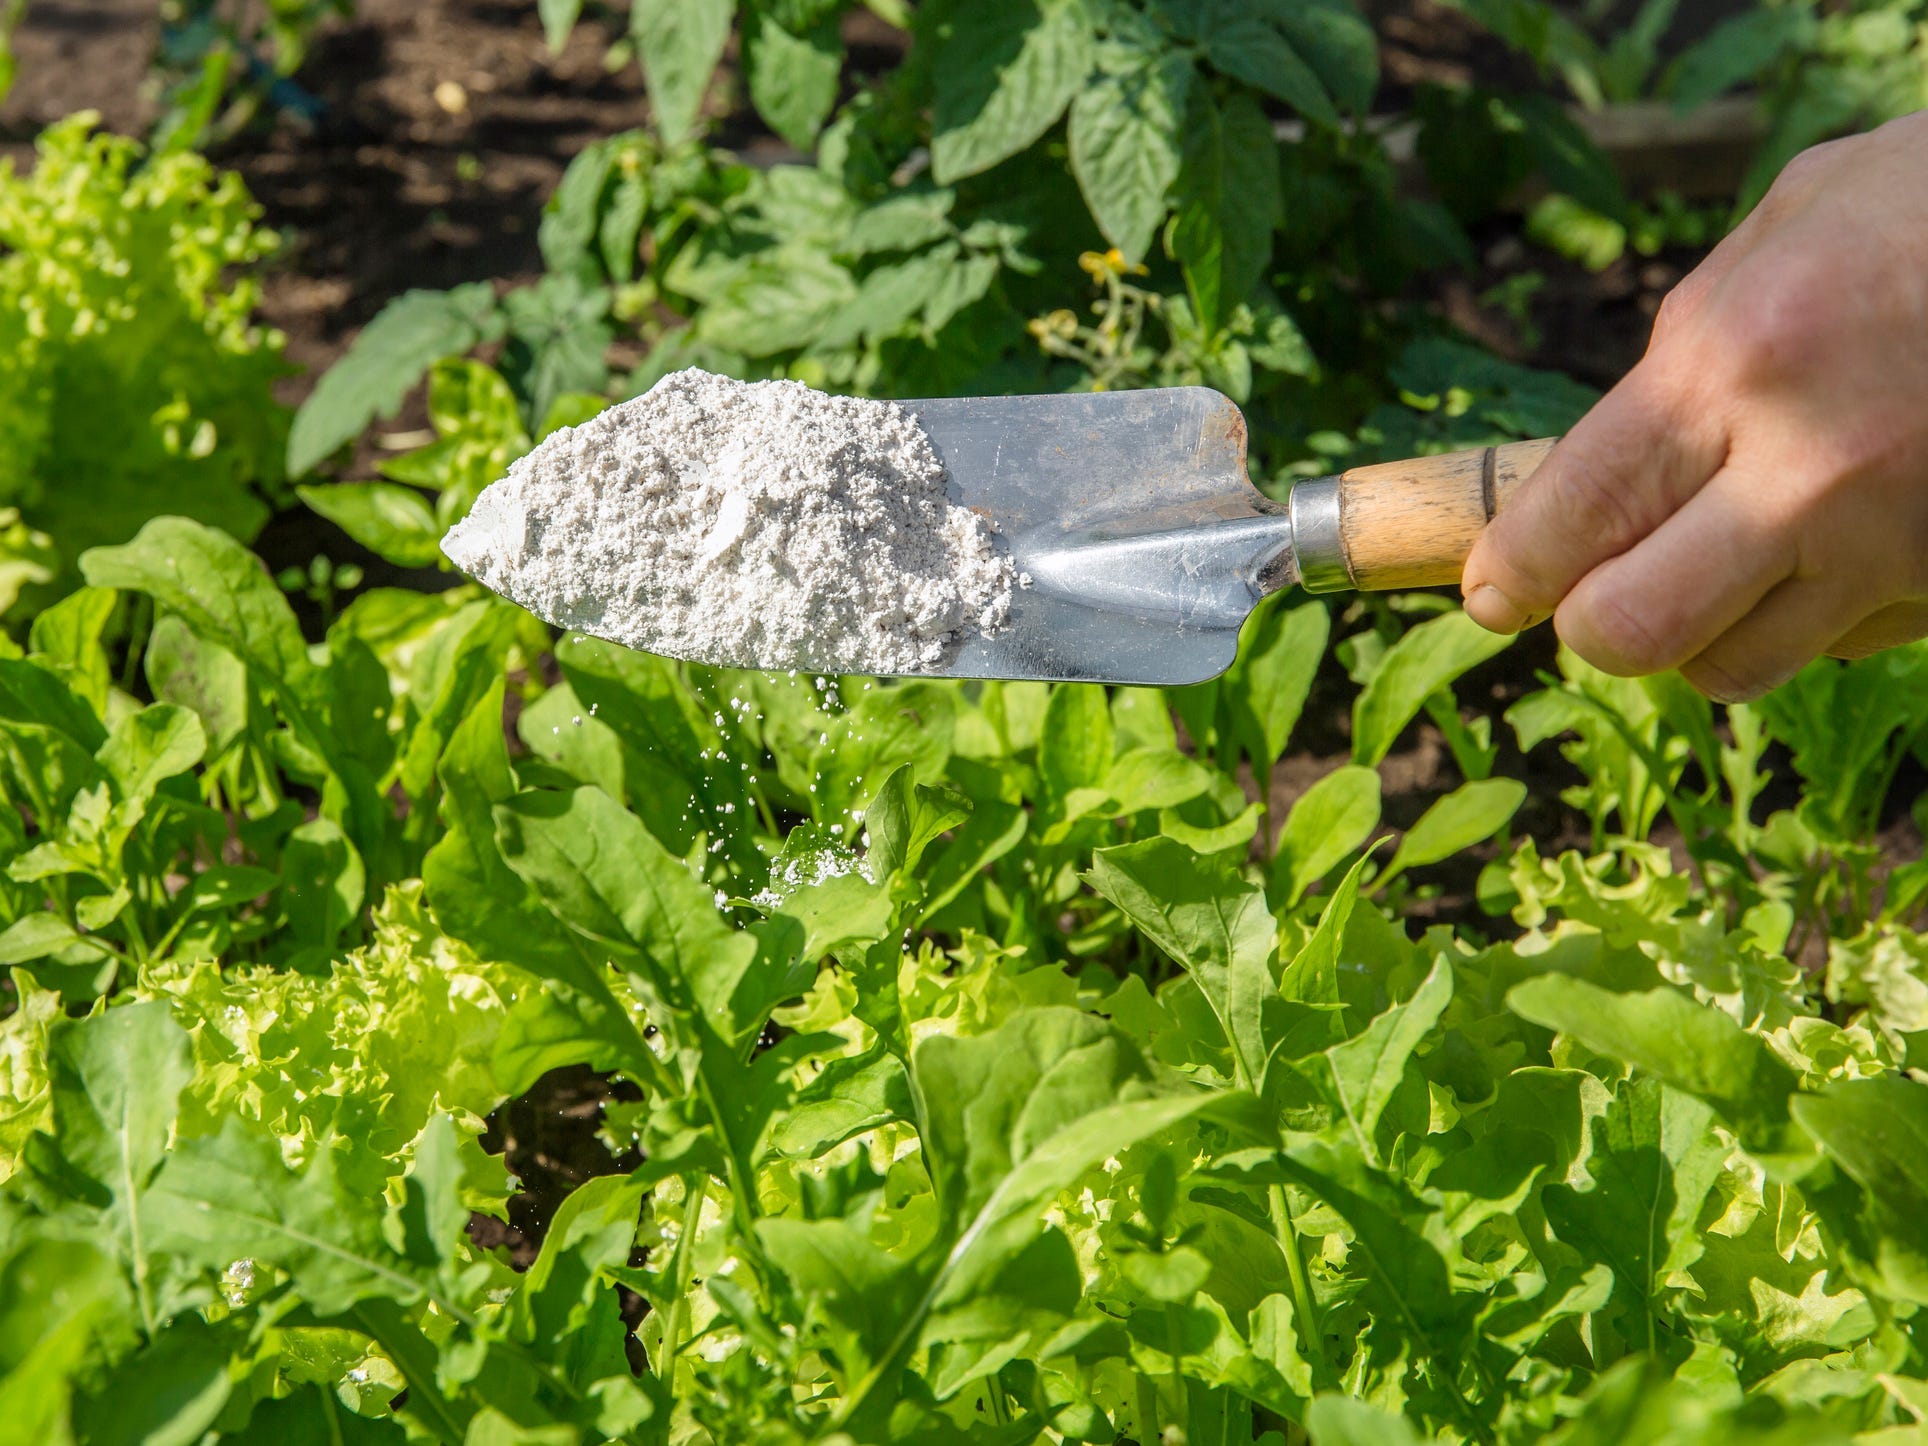 A person using a trowel to sprinkle diatomaceous earth in their garden